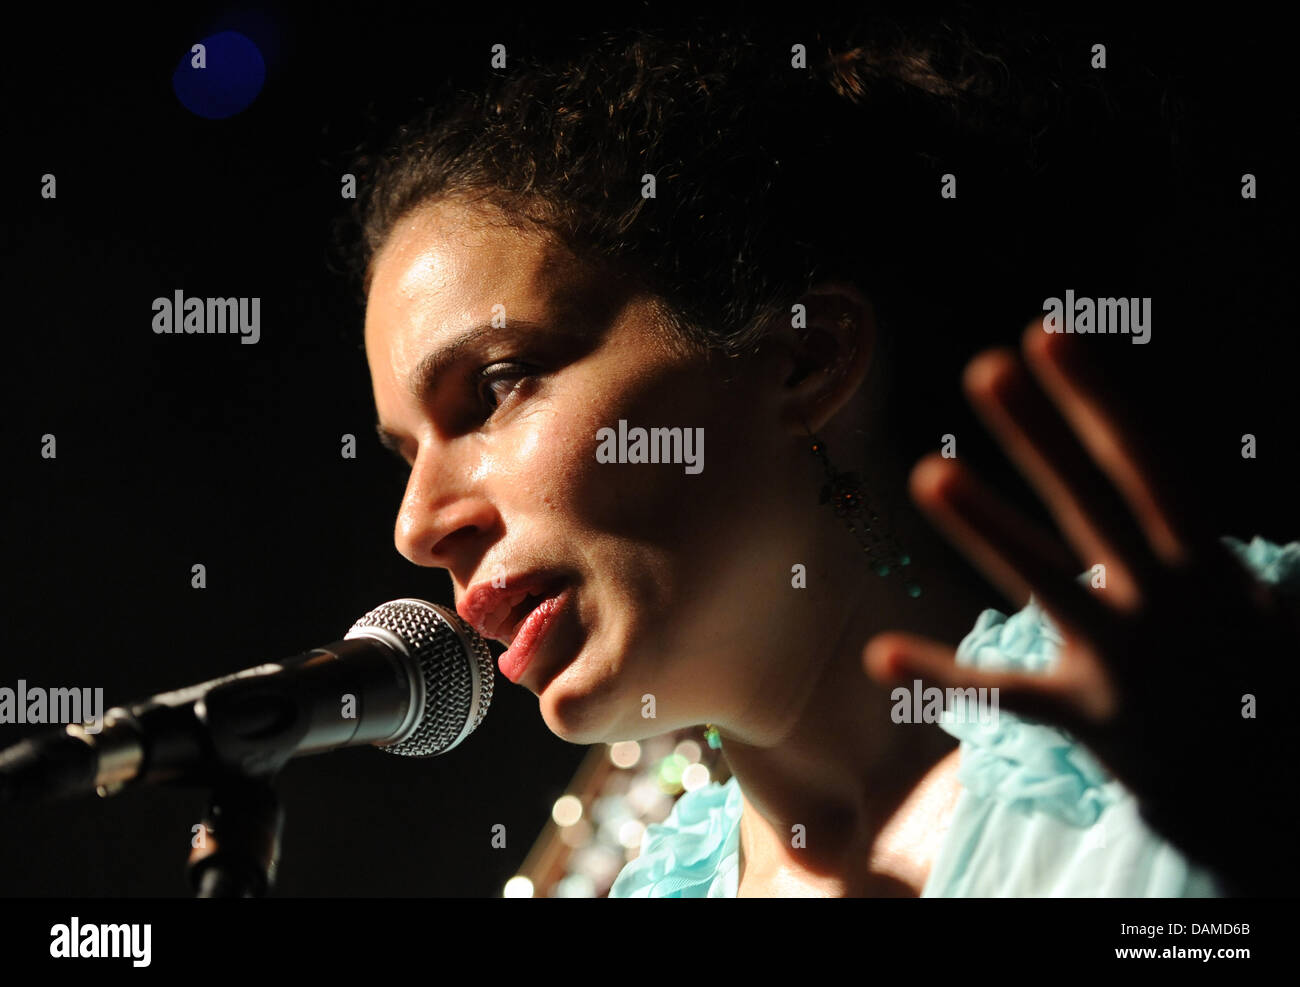 The French-Isrealian singer Yael Naim performs on stage at her Tour-start  at Postbahnhof in Berlin, Germany, 6 June 2011. Yael Naim will perform in Munich and Cologne as well. Photo: Britta Pedersen Stock Photo